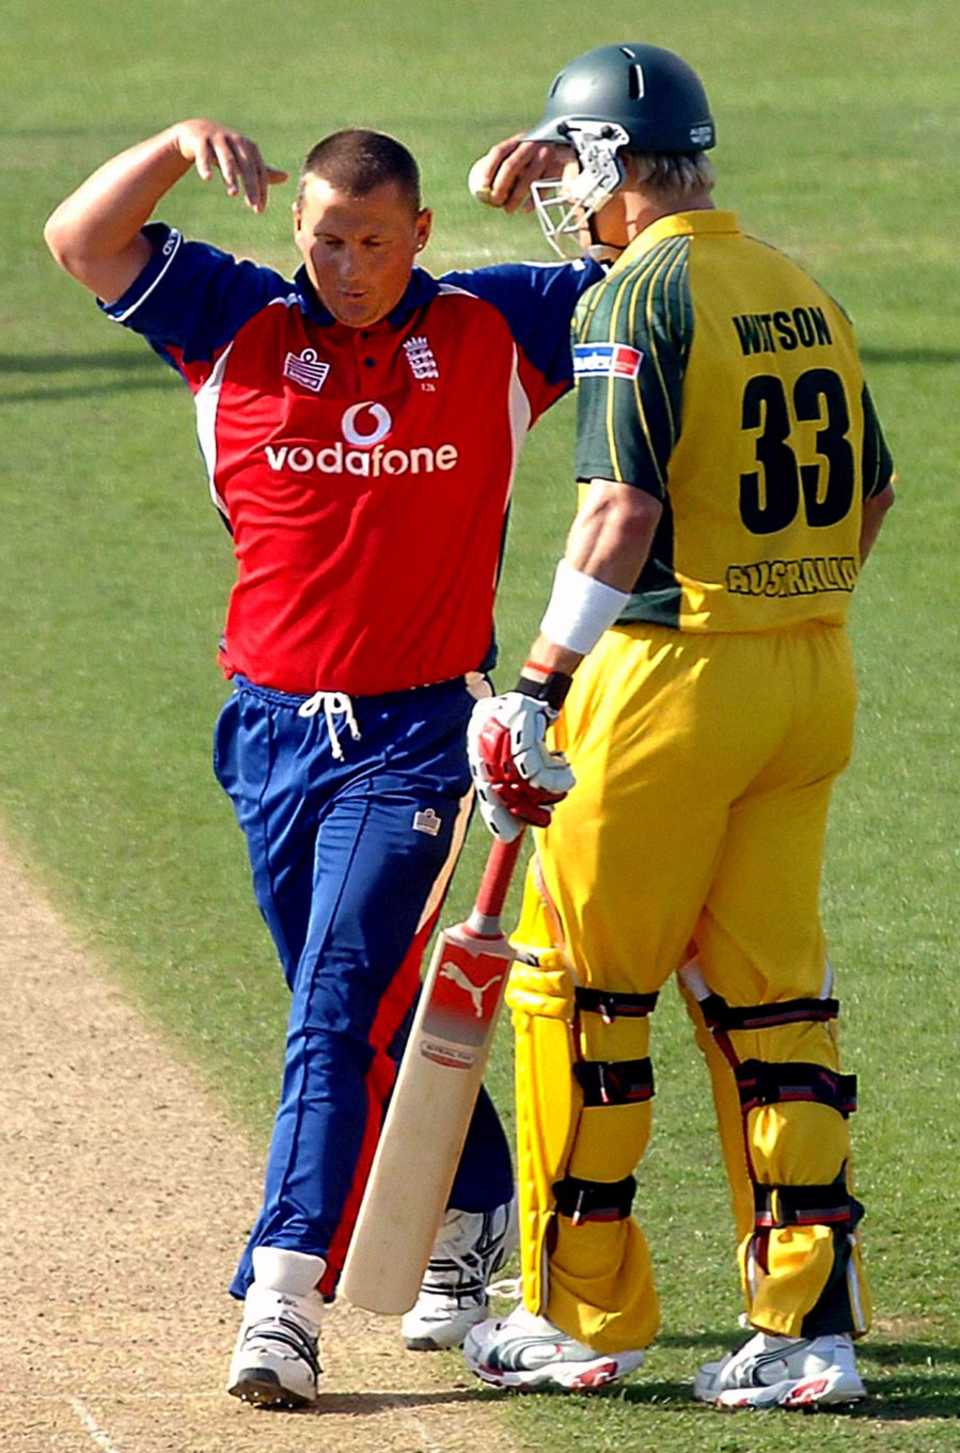 Darren Gough mocks Shane Watson who days earlier had reportedly been so terrified by a ghost at the team hotel he had fled his own room and slept the night on Brett Lee's floor, England v Australia, NatWest Series, Chester-le-Street, June 23, 2005 